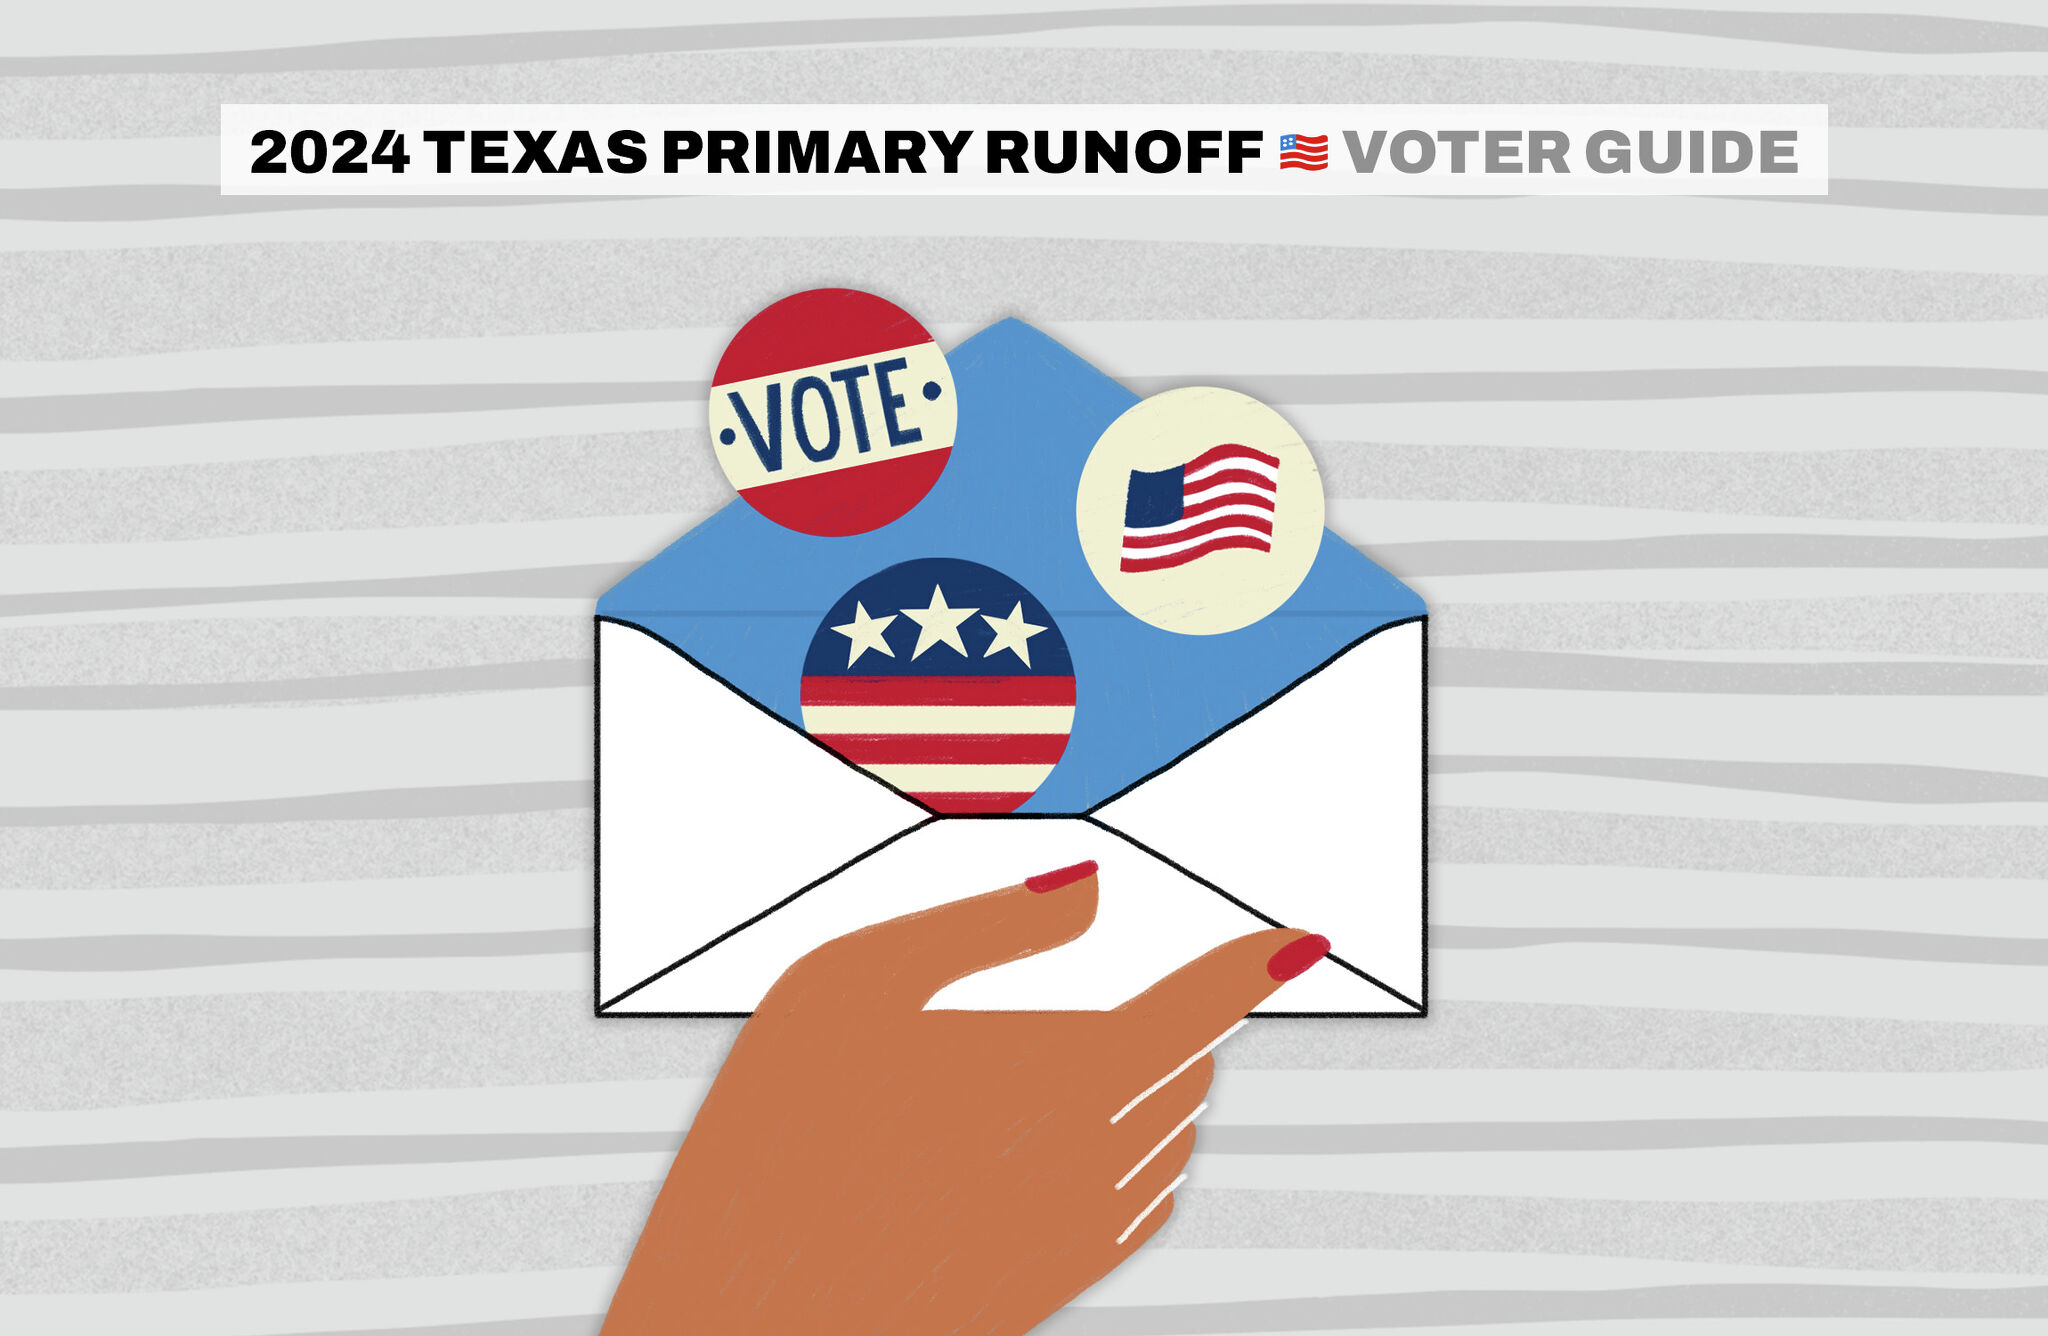 Texas Voter Guide: Inside the 2024 primary runoff races